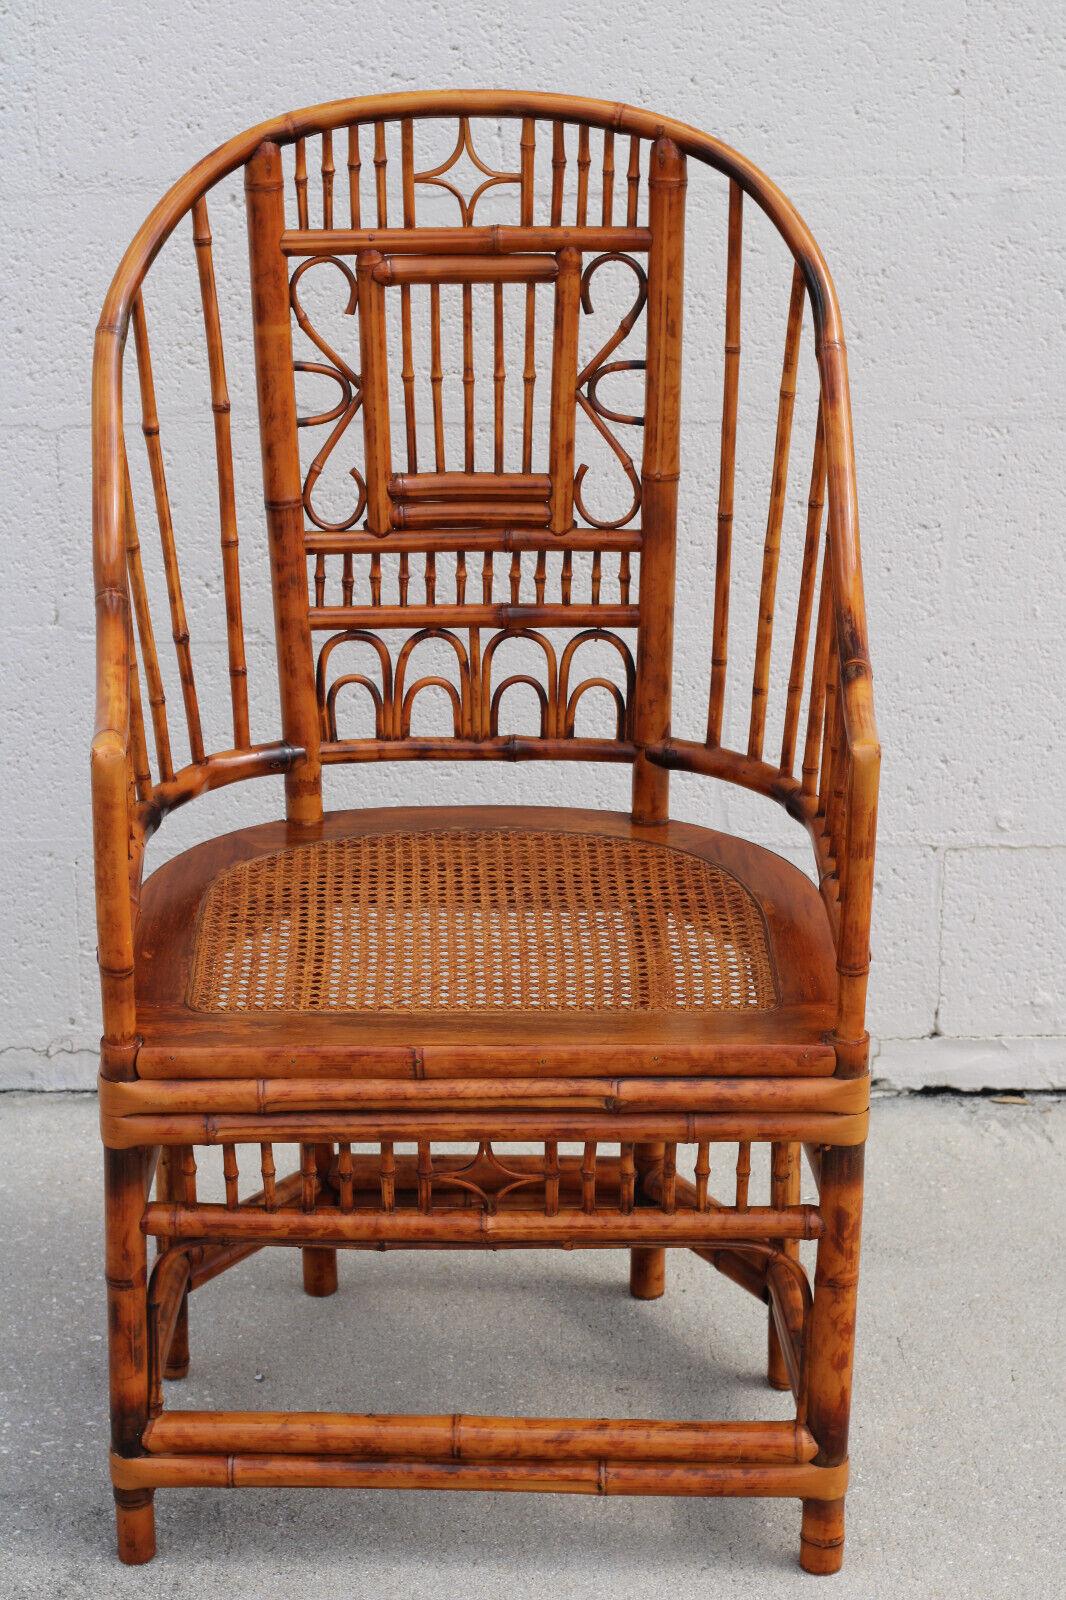 Hand-Crafted High Back Brighton Pavilion Style Tortoiseshell Bamboo Cane Armchairs, a Pair For Sale